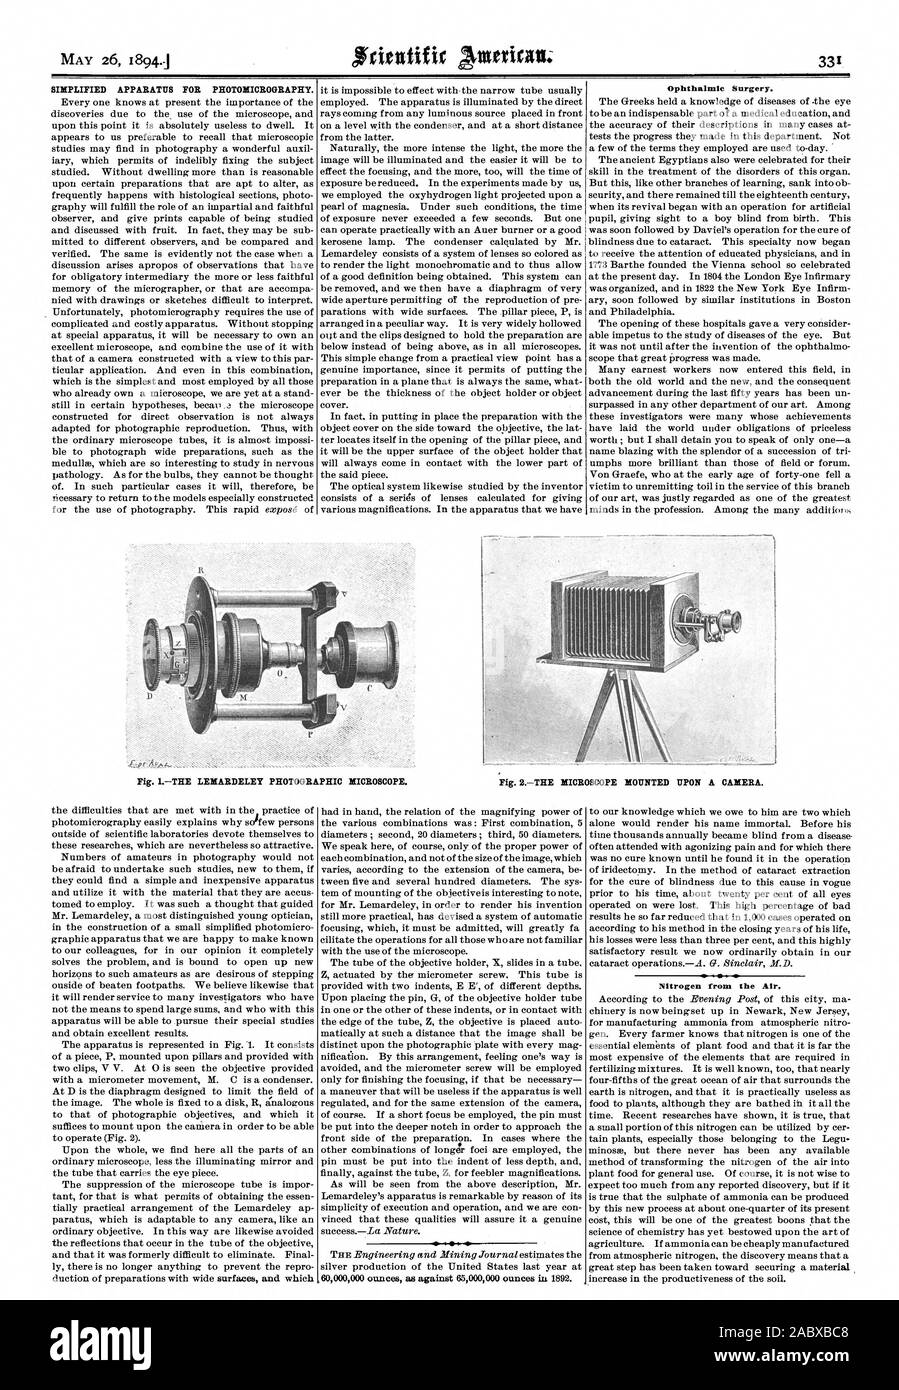 SIMPLIFIED APPARATUS FOR PHOTOMICROGRAPHY. Ophthalmic Surgery. Fig. 1THE LEMARDELEY PHOTOGRAPHIC MICROSCOPE. Nitrogen from the Air., scientific american, 1894-05-26 Stock Photo